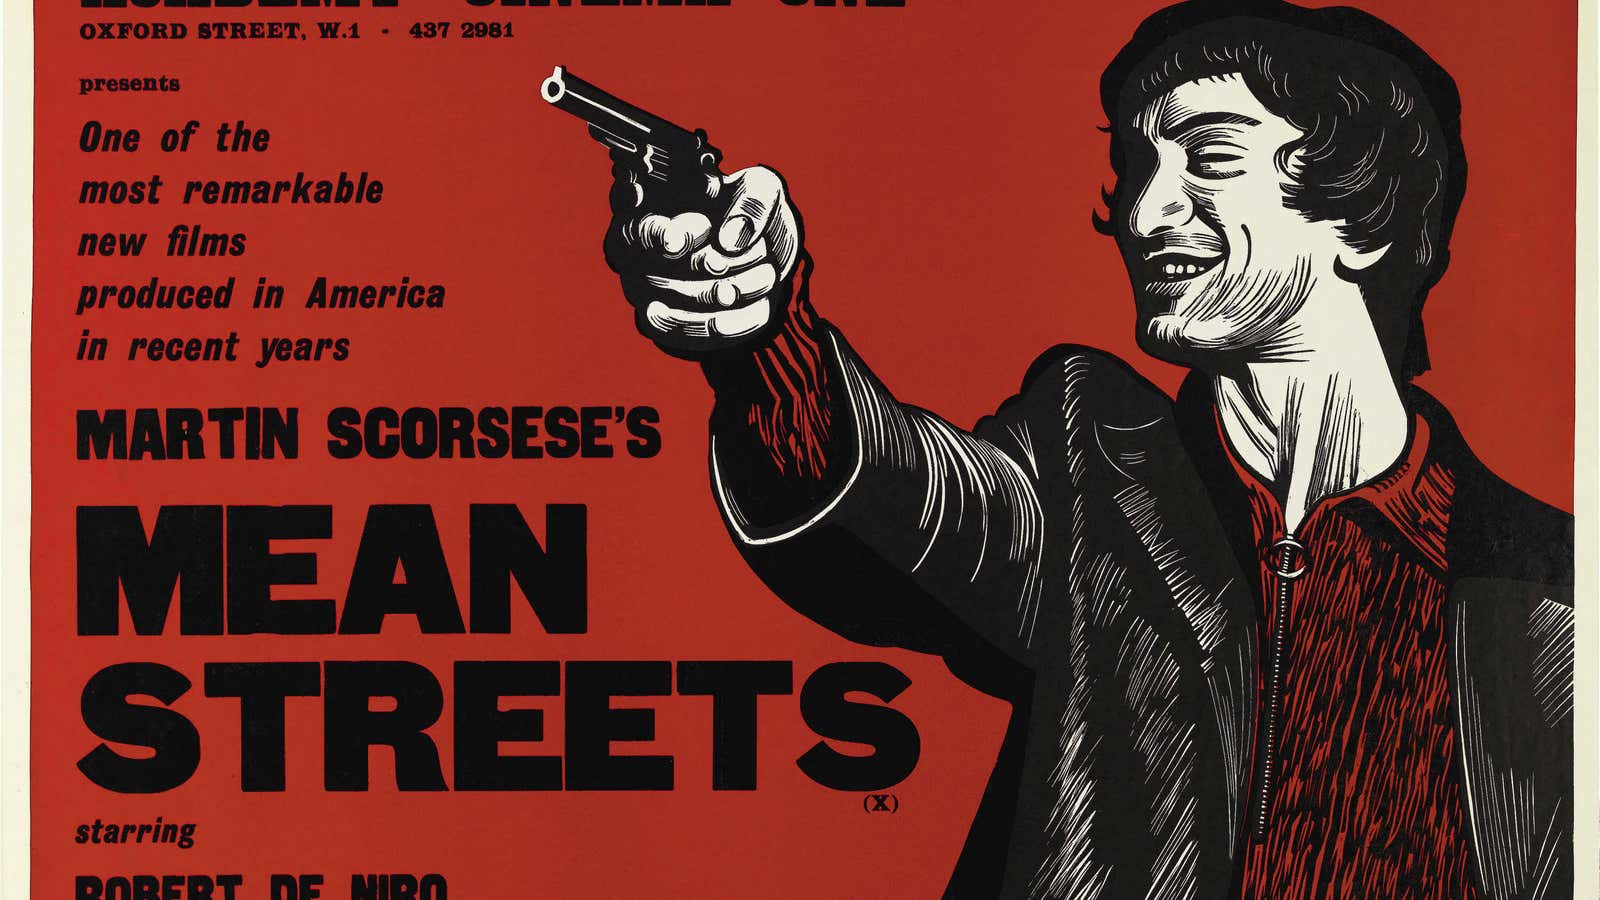 British quad poster for Mean Streets, directed by Martin Scorsese, USA, 1973. Poster design by Peter Strausfeld, 1973.